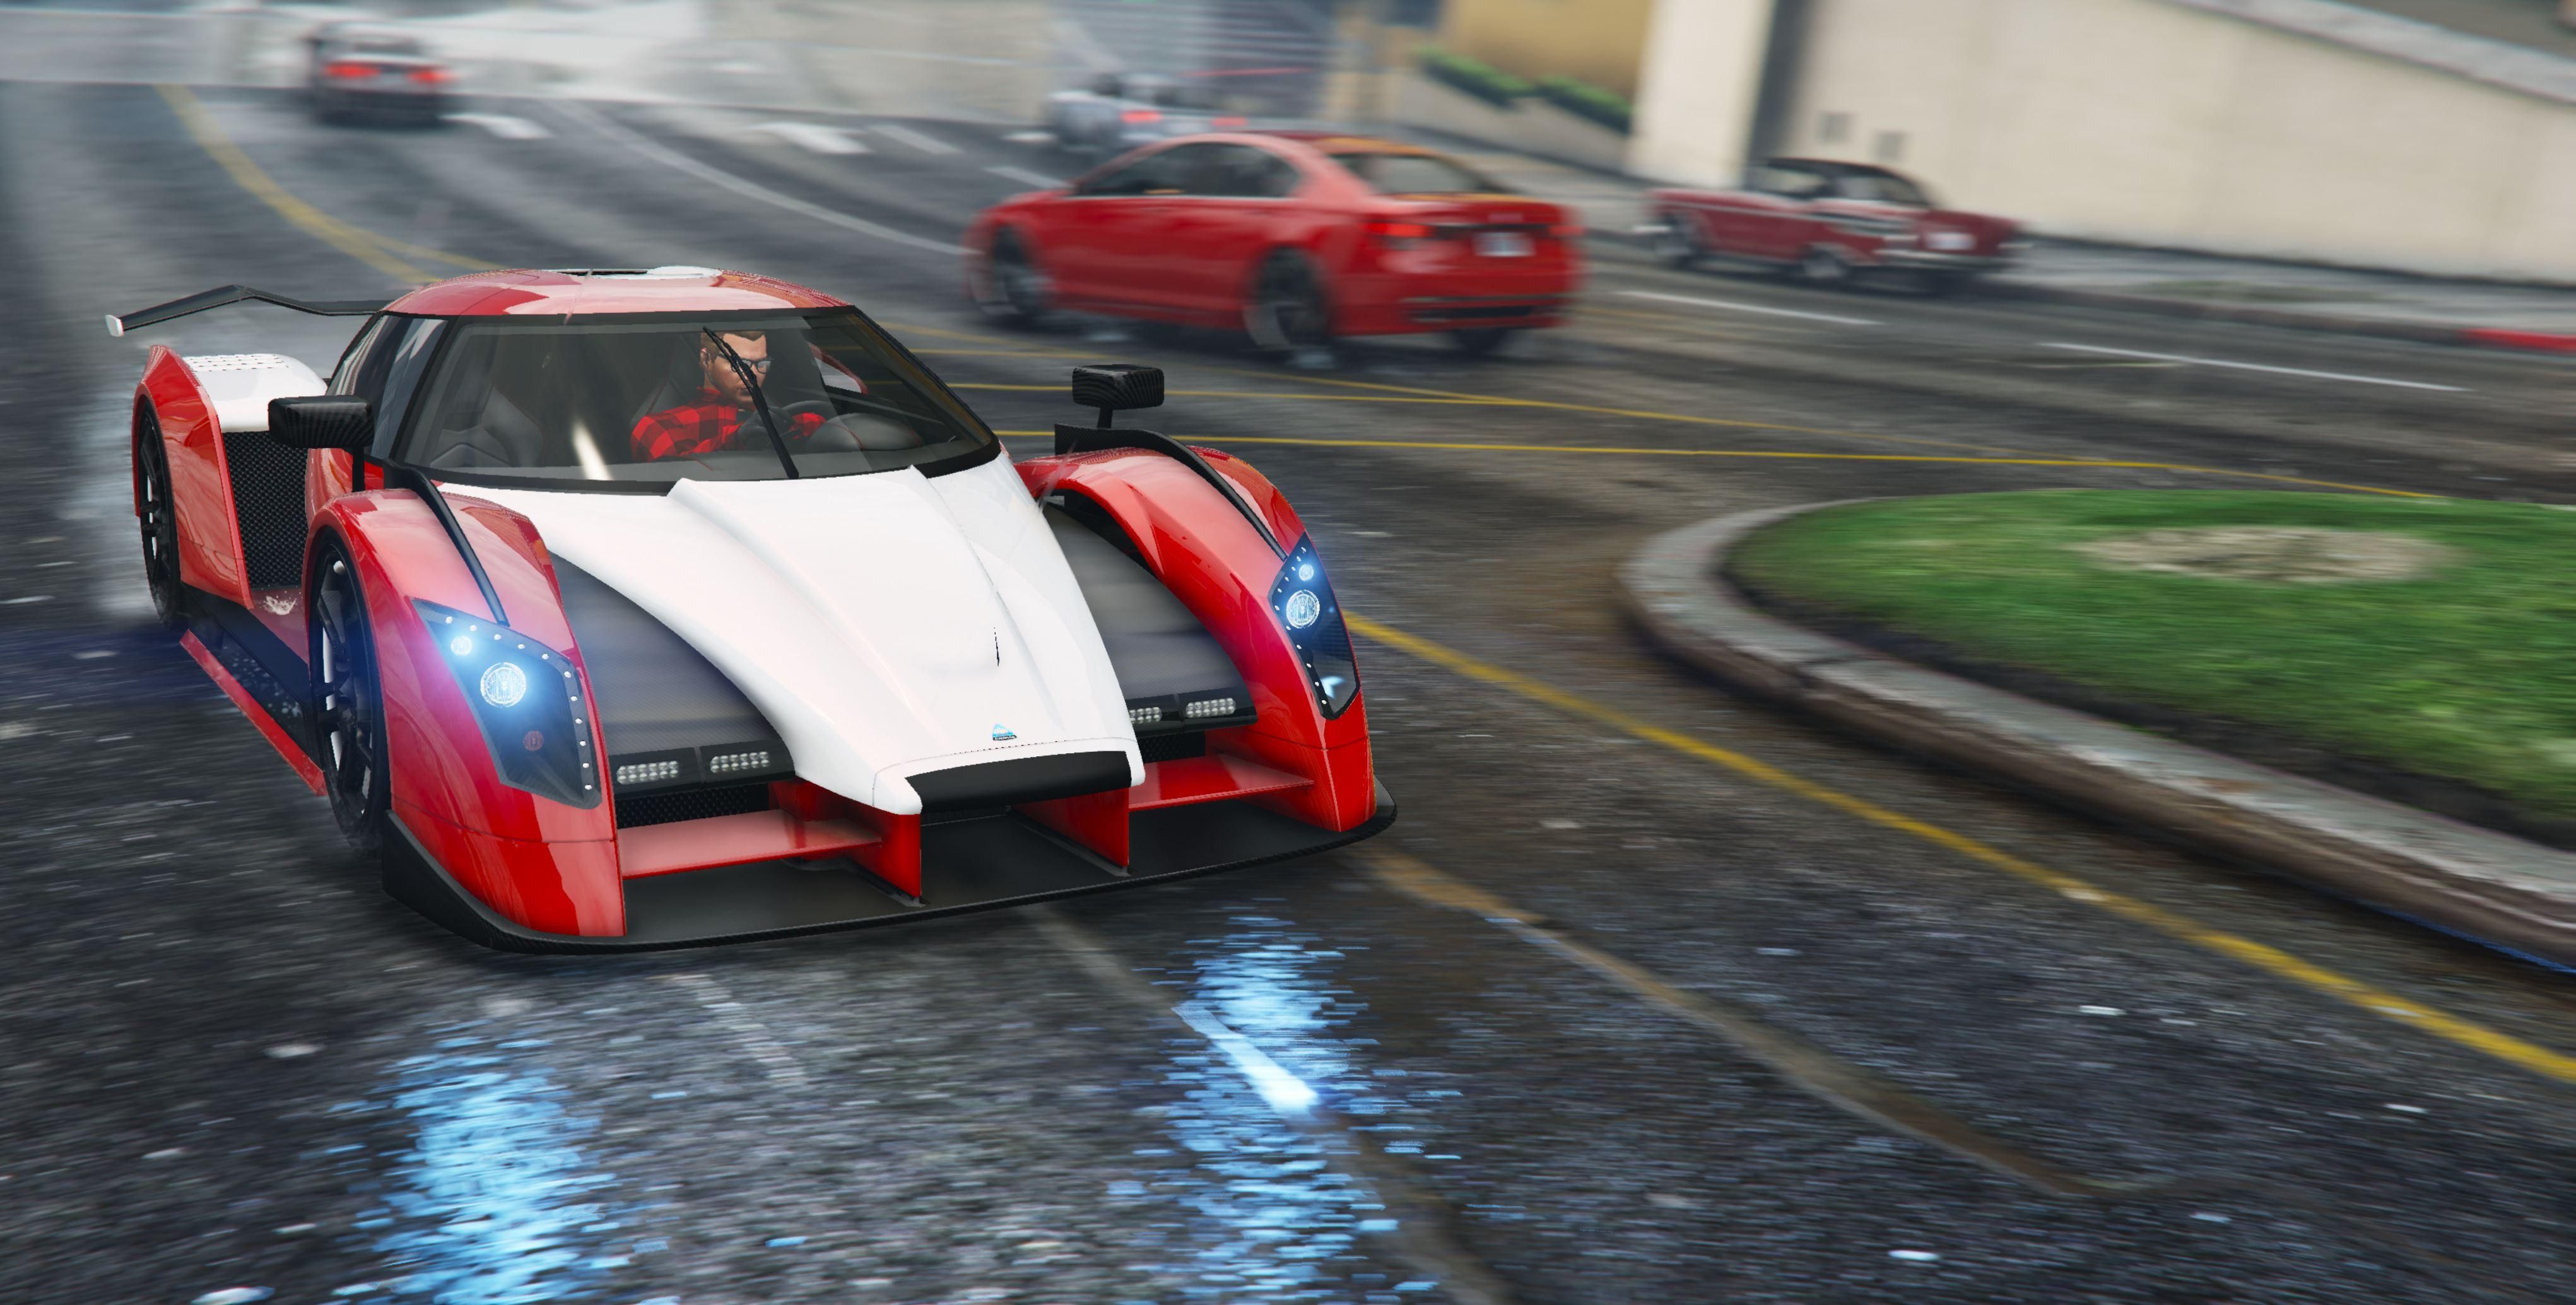 Fastest Cars In Gta 5 Ranked